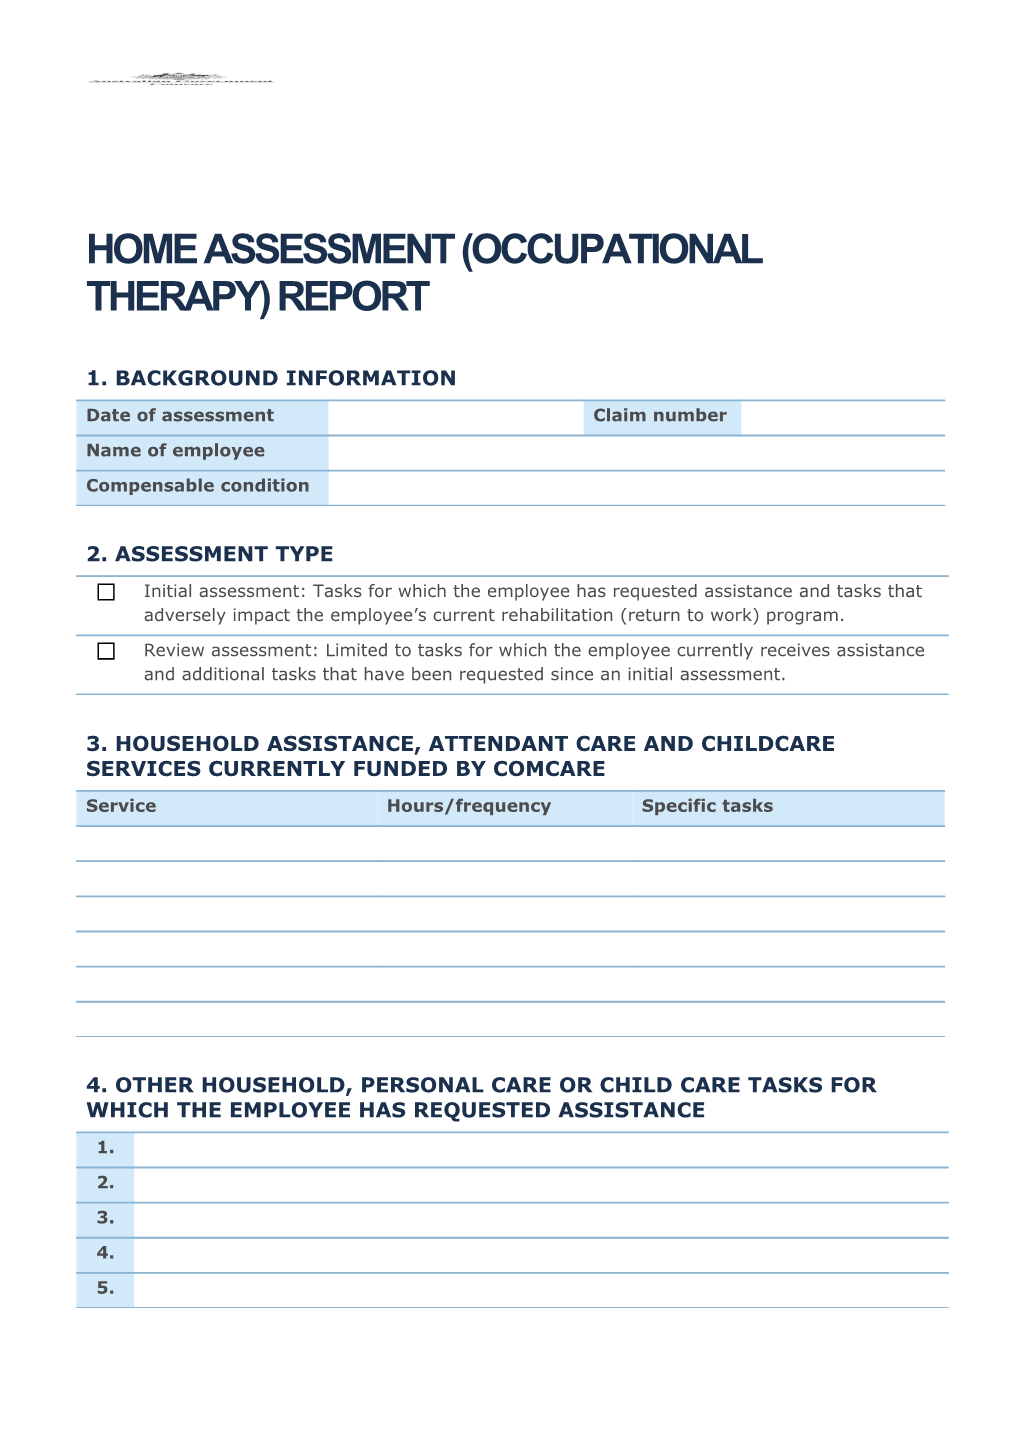 Home Assessment (Occupational Therapy) Report